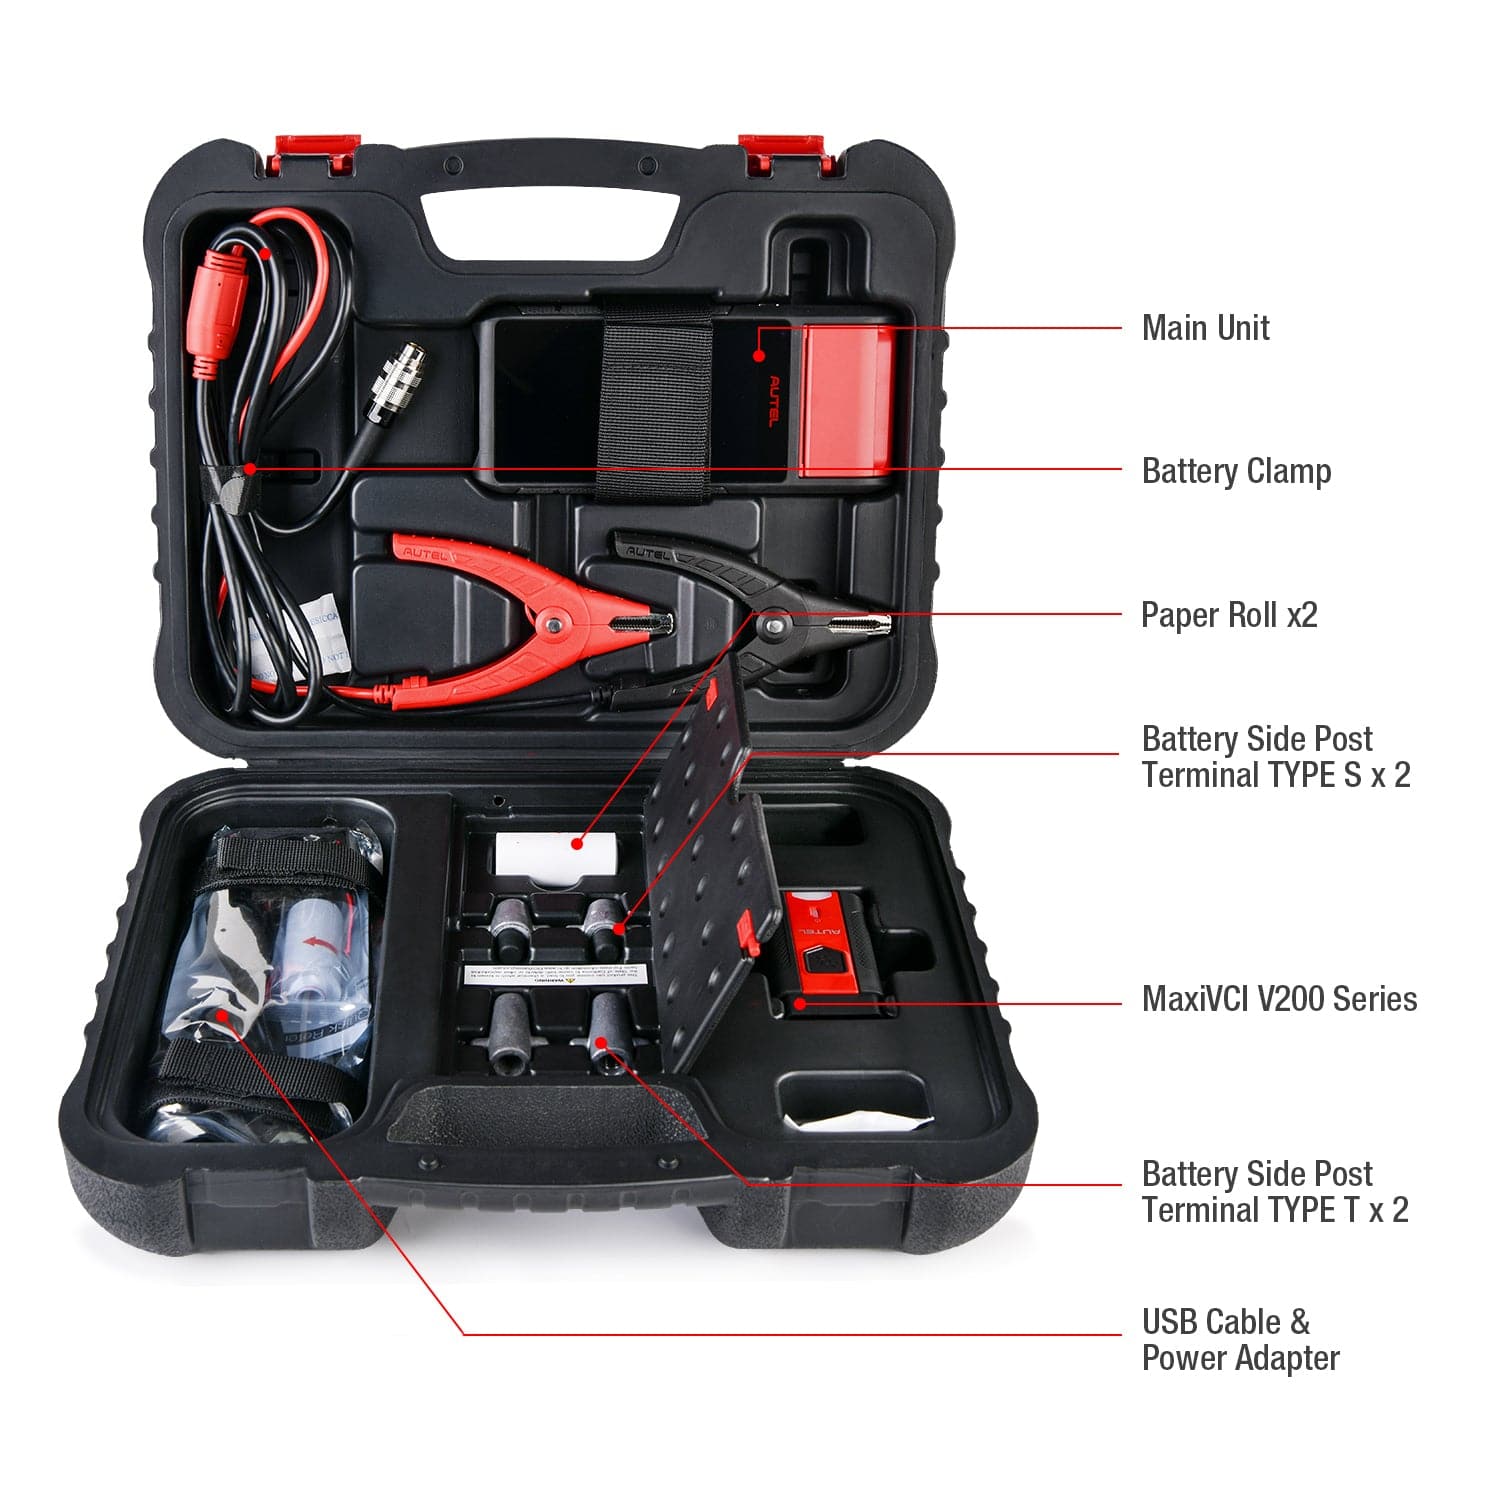  Autel MaxiBAS BT506 with TPMS Tool Vehicle Battery